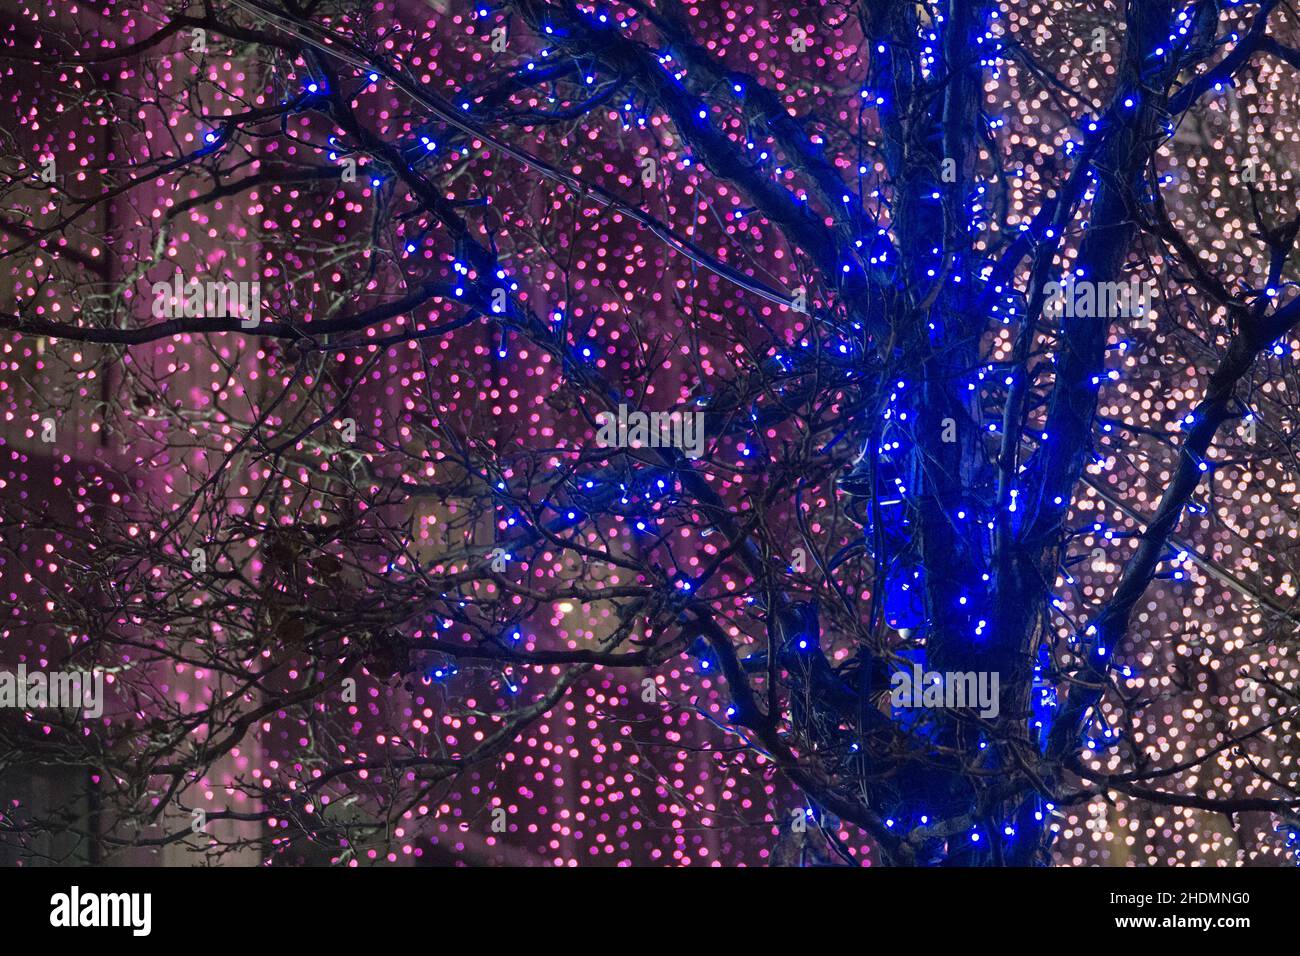 London, UK, 6 January 2021: Fairy lights in trees and on buildings on Oxford Street on Epiphany, the traditional end of the Christmas season in the Western church. Anna Watson/Alamy Live News Stock Photo